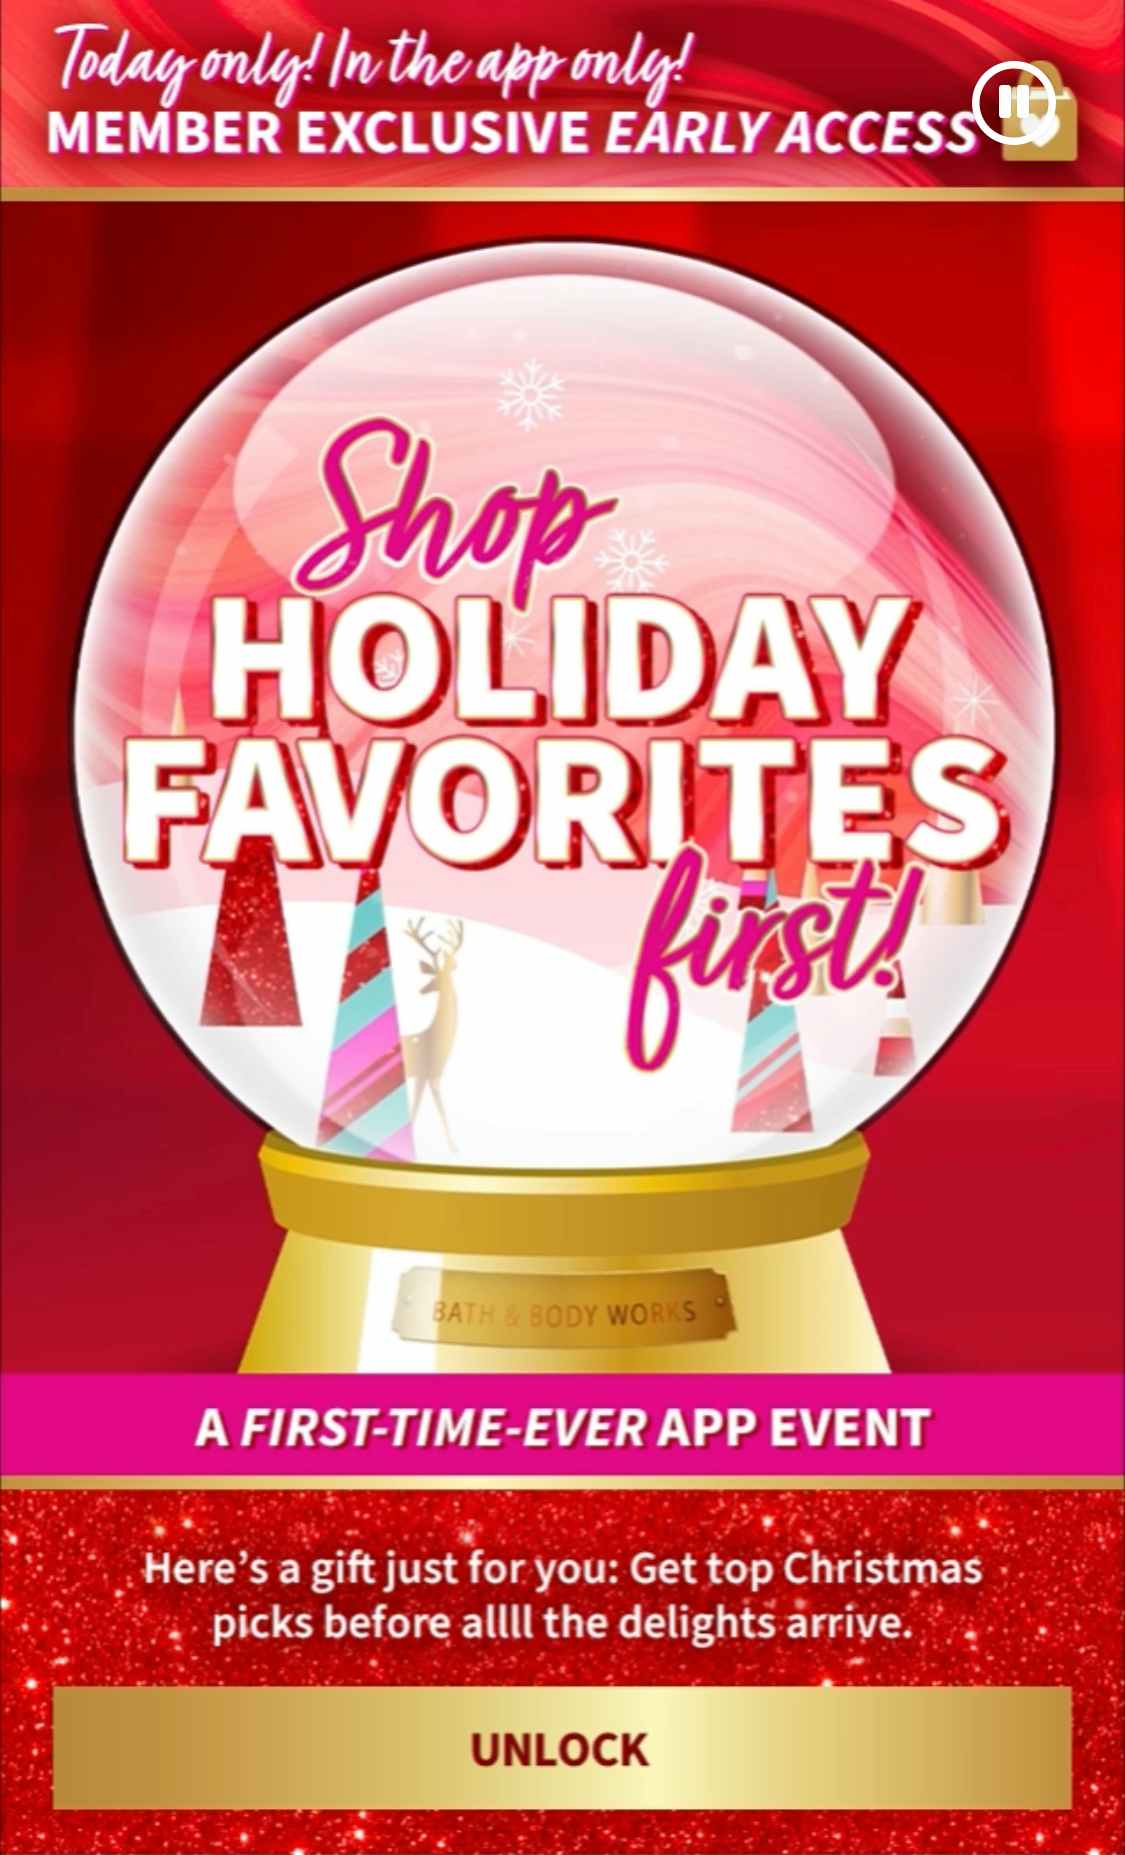 holiday shop in app promotion